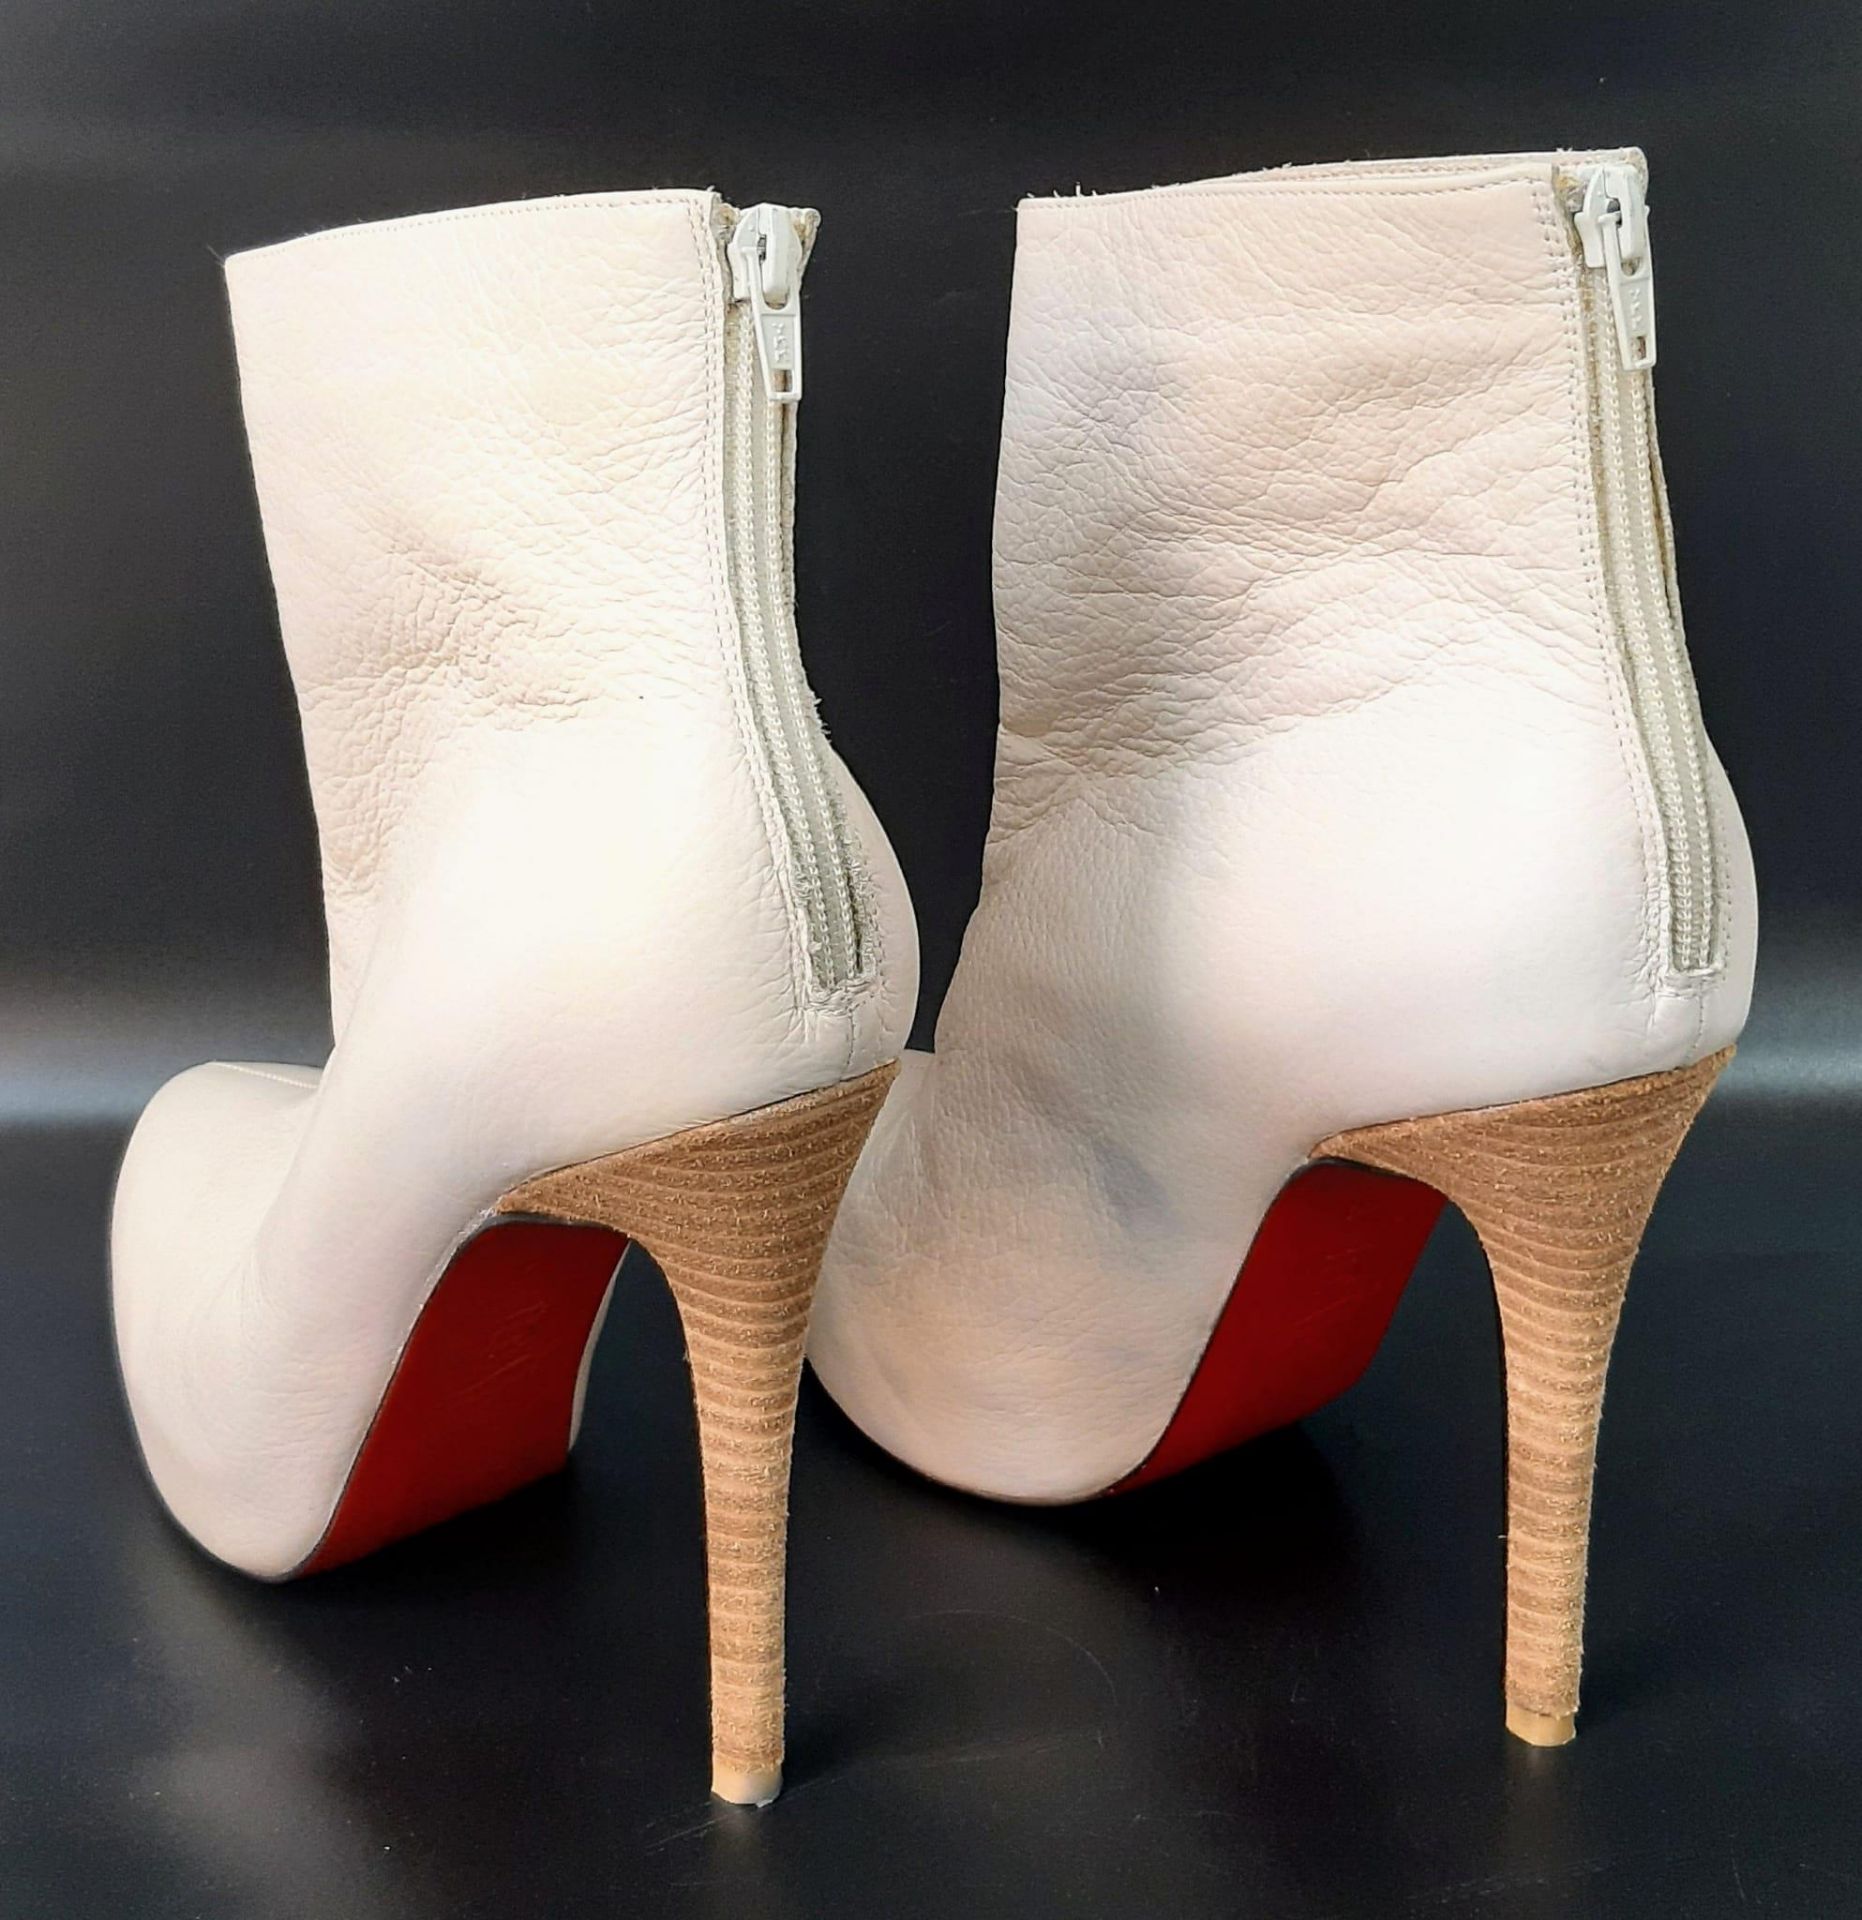 A Pair of Preloved Christian Louboutin Platform Ankle Boots, White leather with Wooden Heel, UK - Image 4 of 8